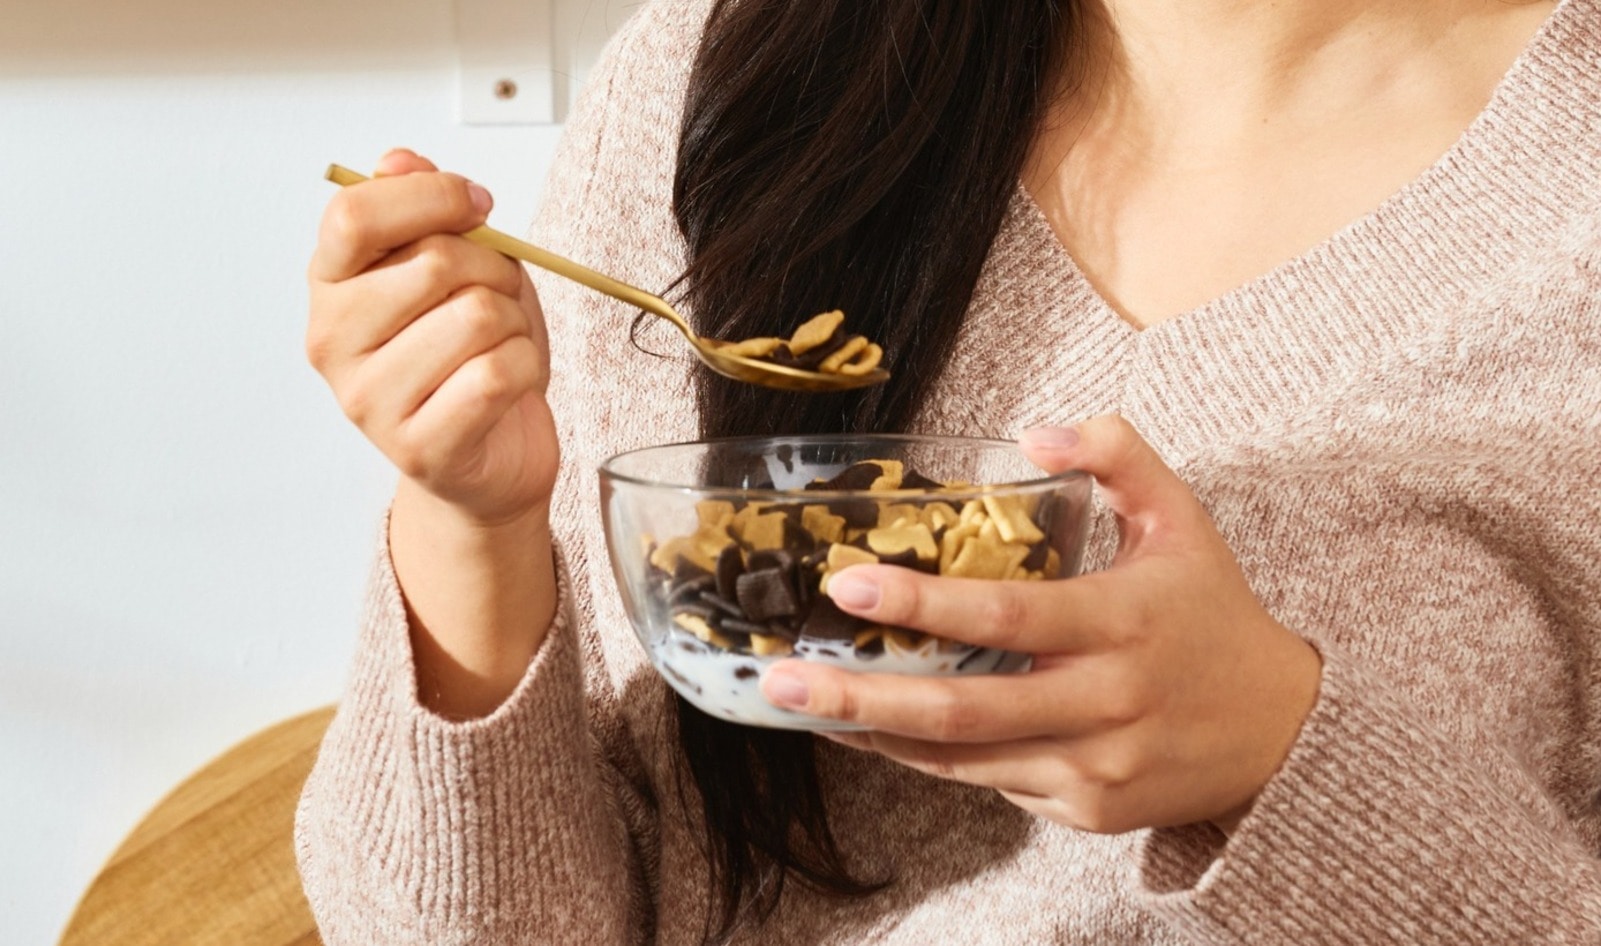 95 Percent of Americans Don't Get Enough Fiber, These Breakfast Cereals Can Help